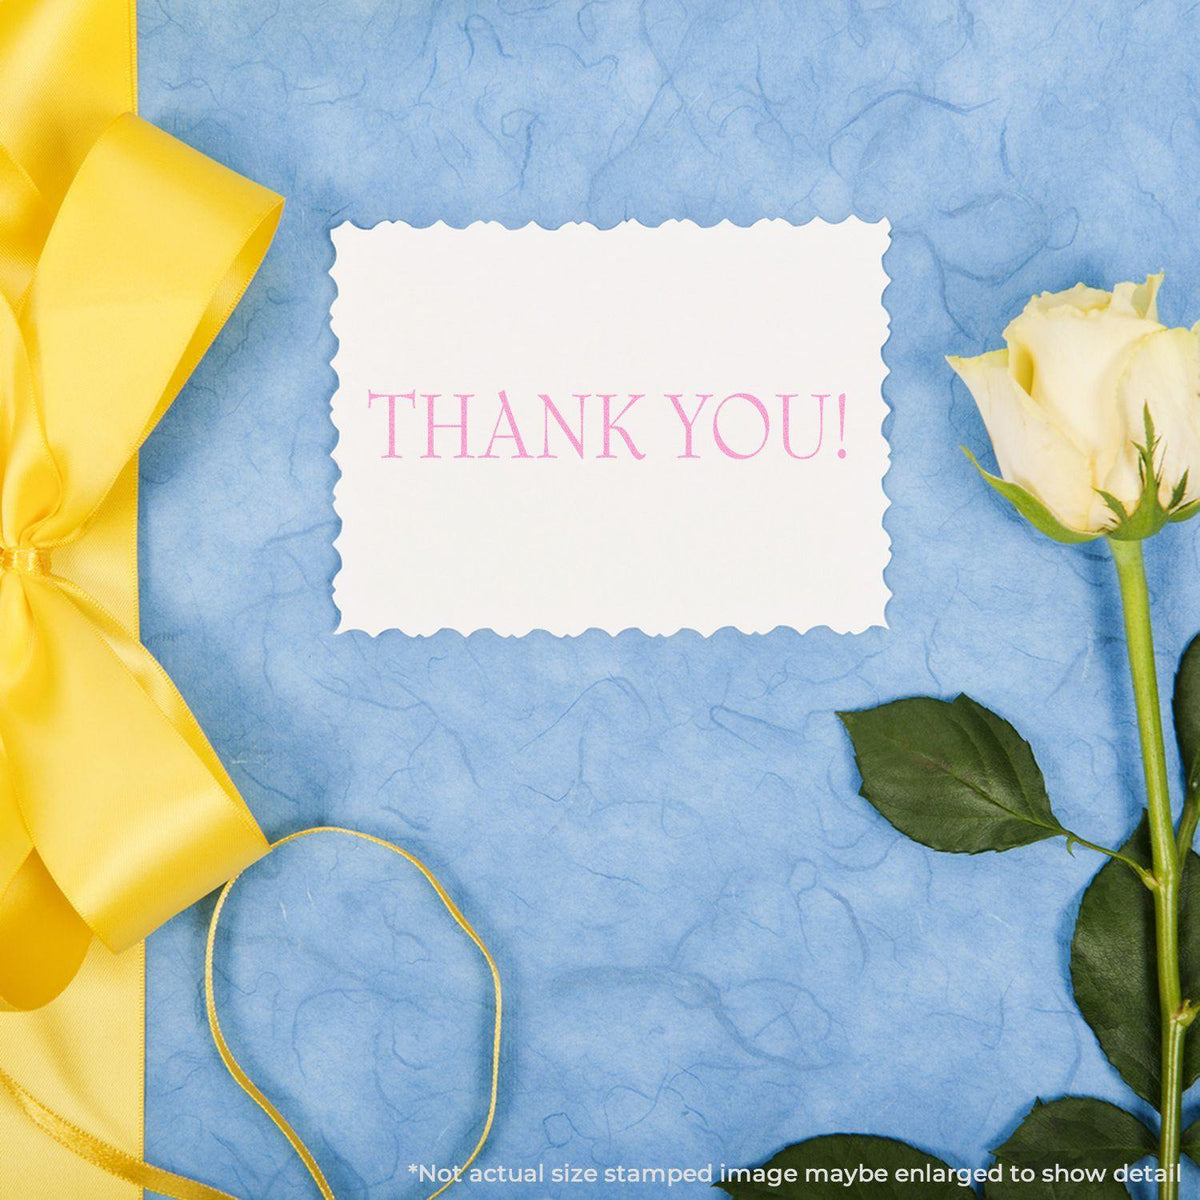 Thank You Rubber Stamp In Use Photo